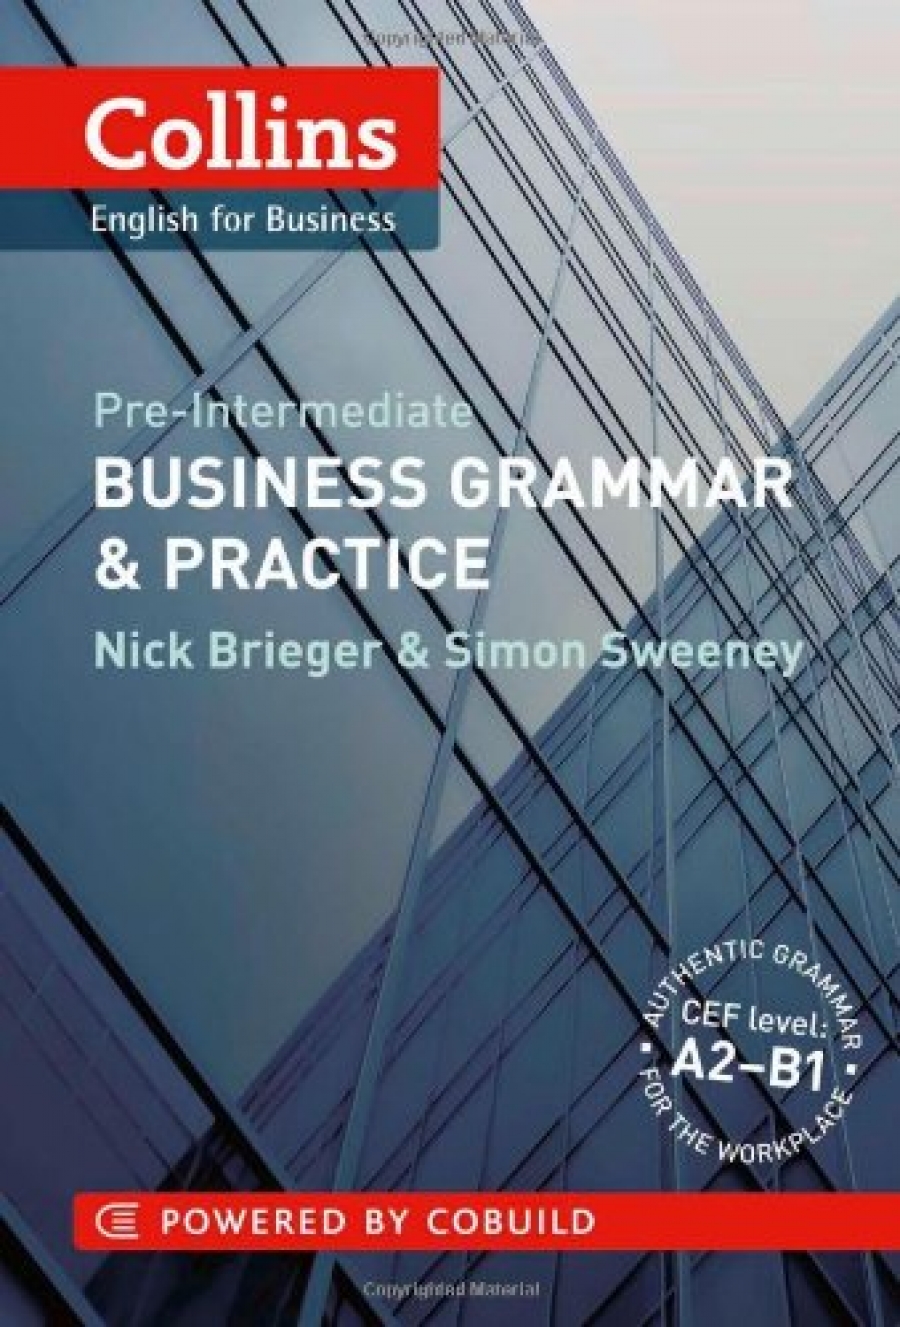 Sweeney S., Brieger N. Collins English for Business: Business Grammar and Practice, Level Pre-Intermediate (.  , - ) 